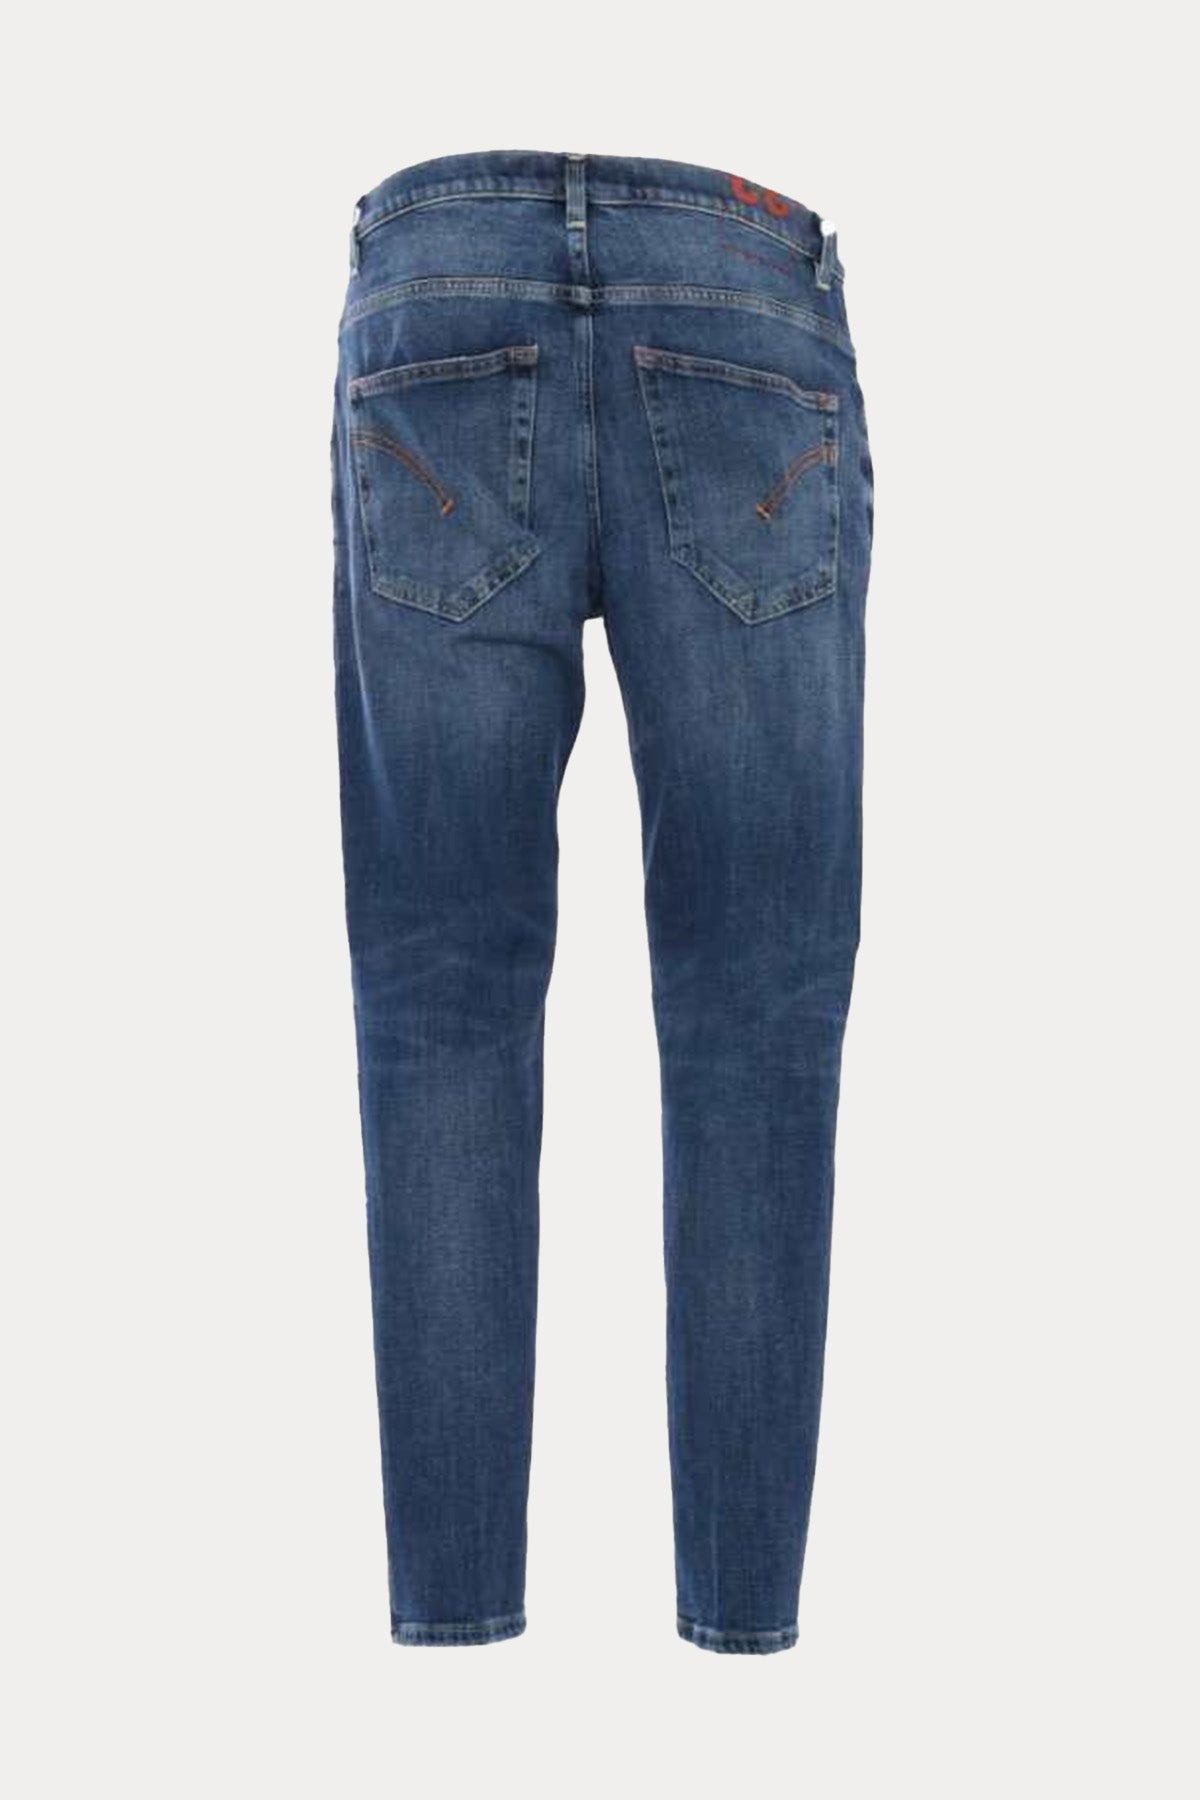 Dondup Brighton Carrot Fit Jeans-Libas Trendy Fashion Store